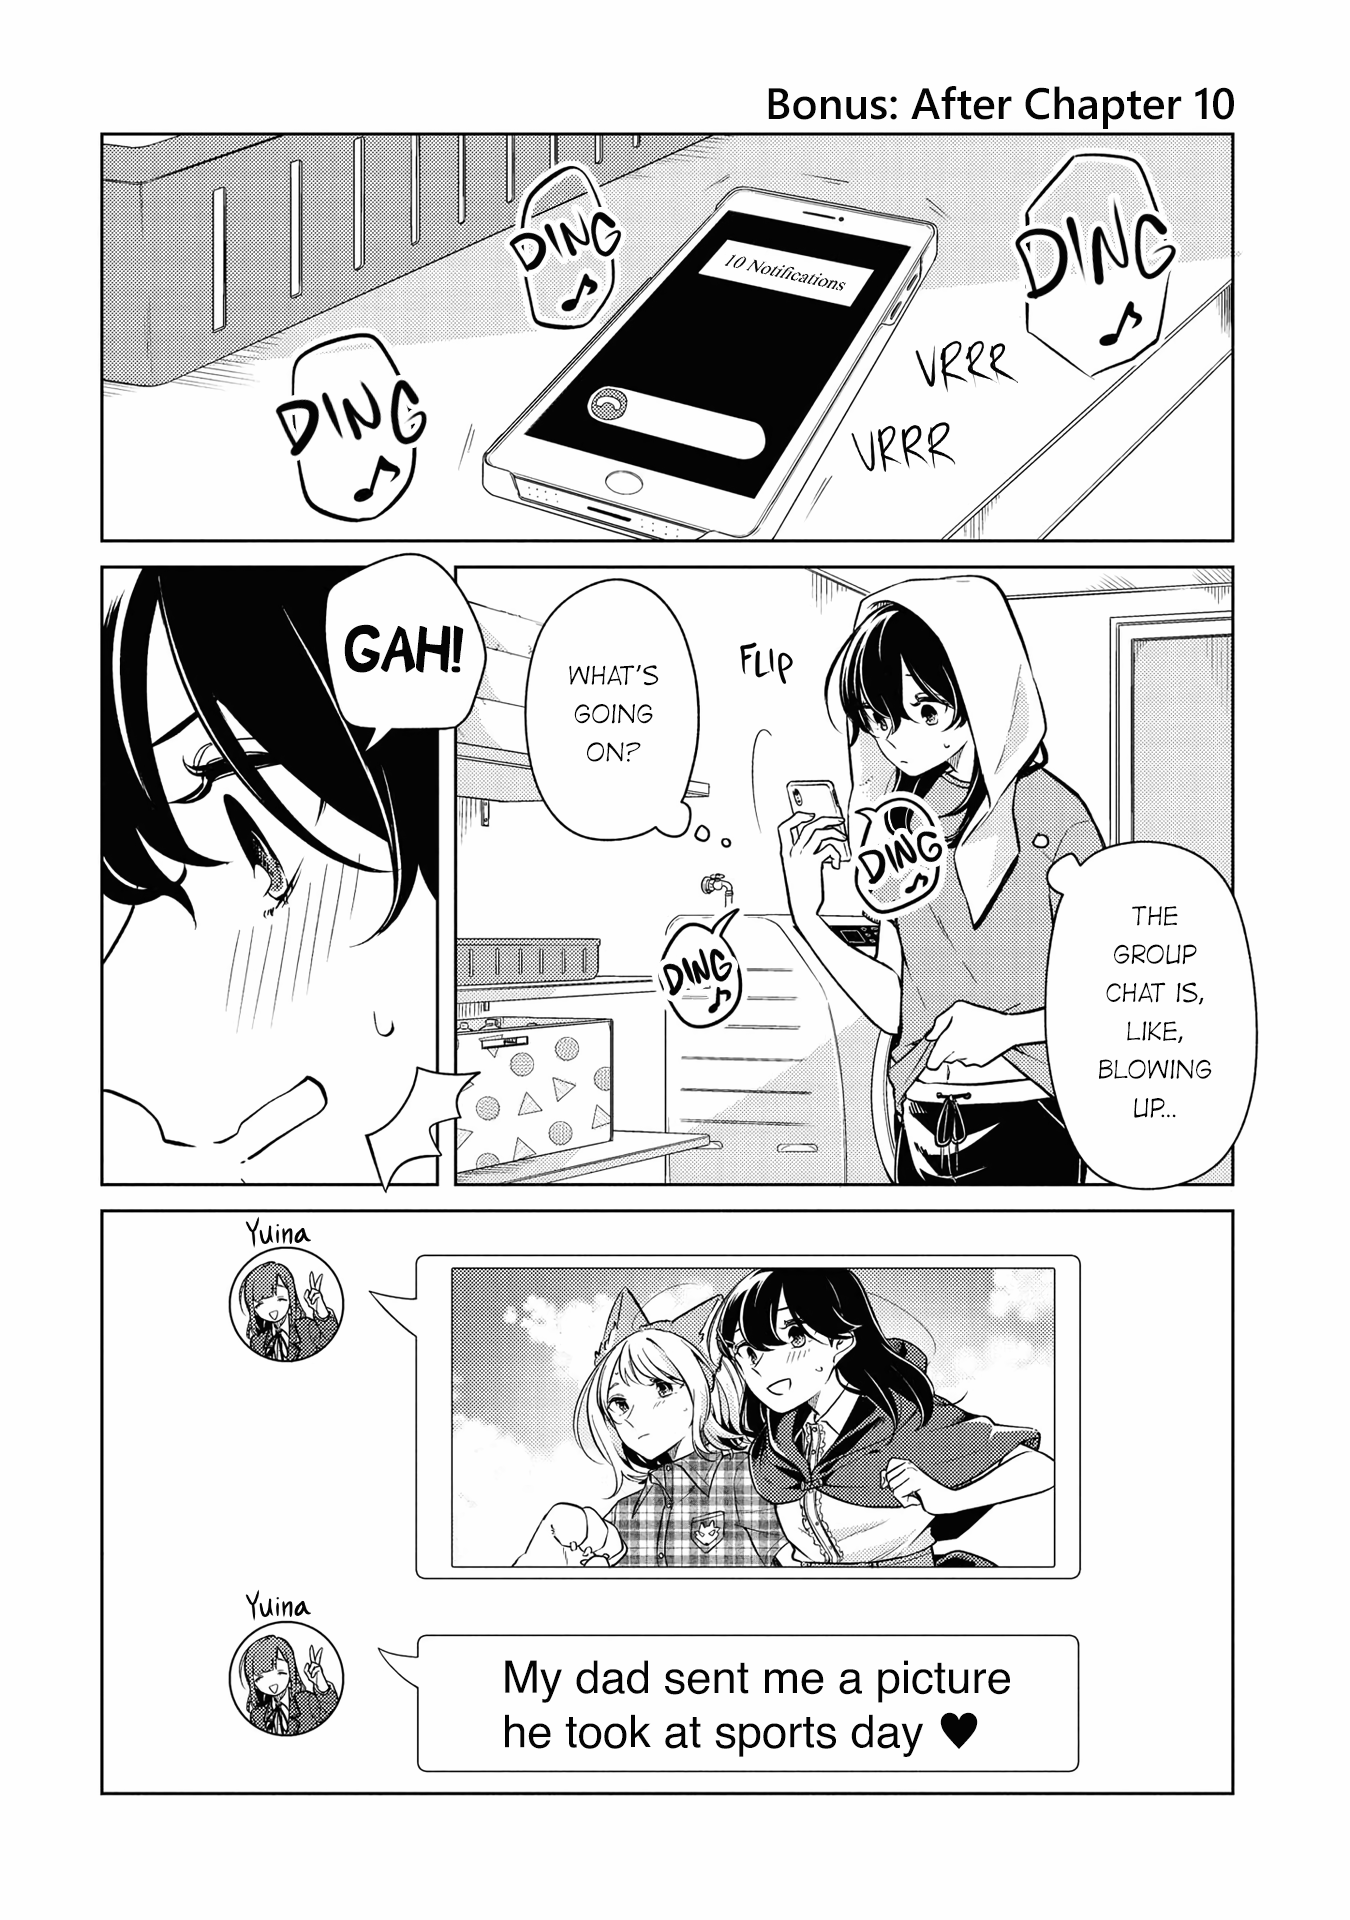 Can't Defy The Lonely Girl Vol.2 Chapter 10.1: Volume 2 Extras - Picture 1